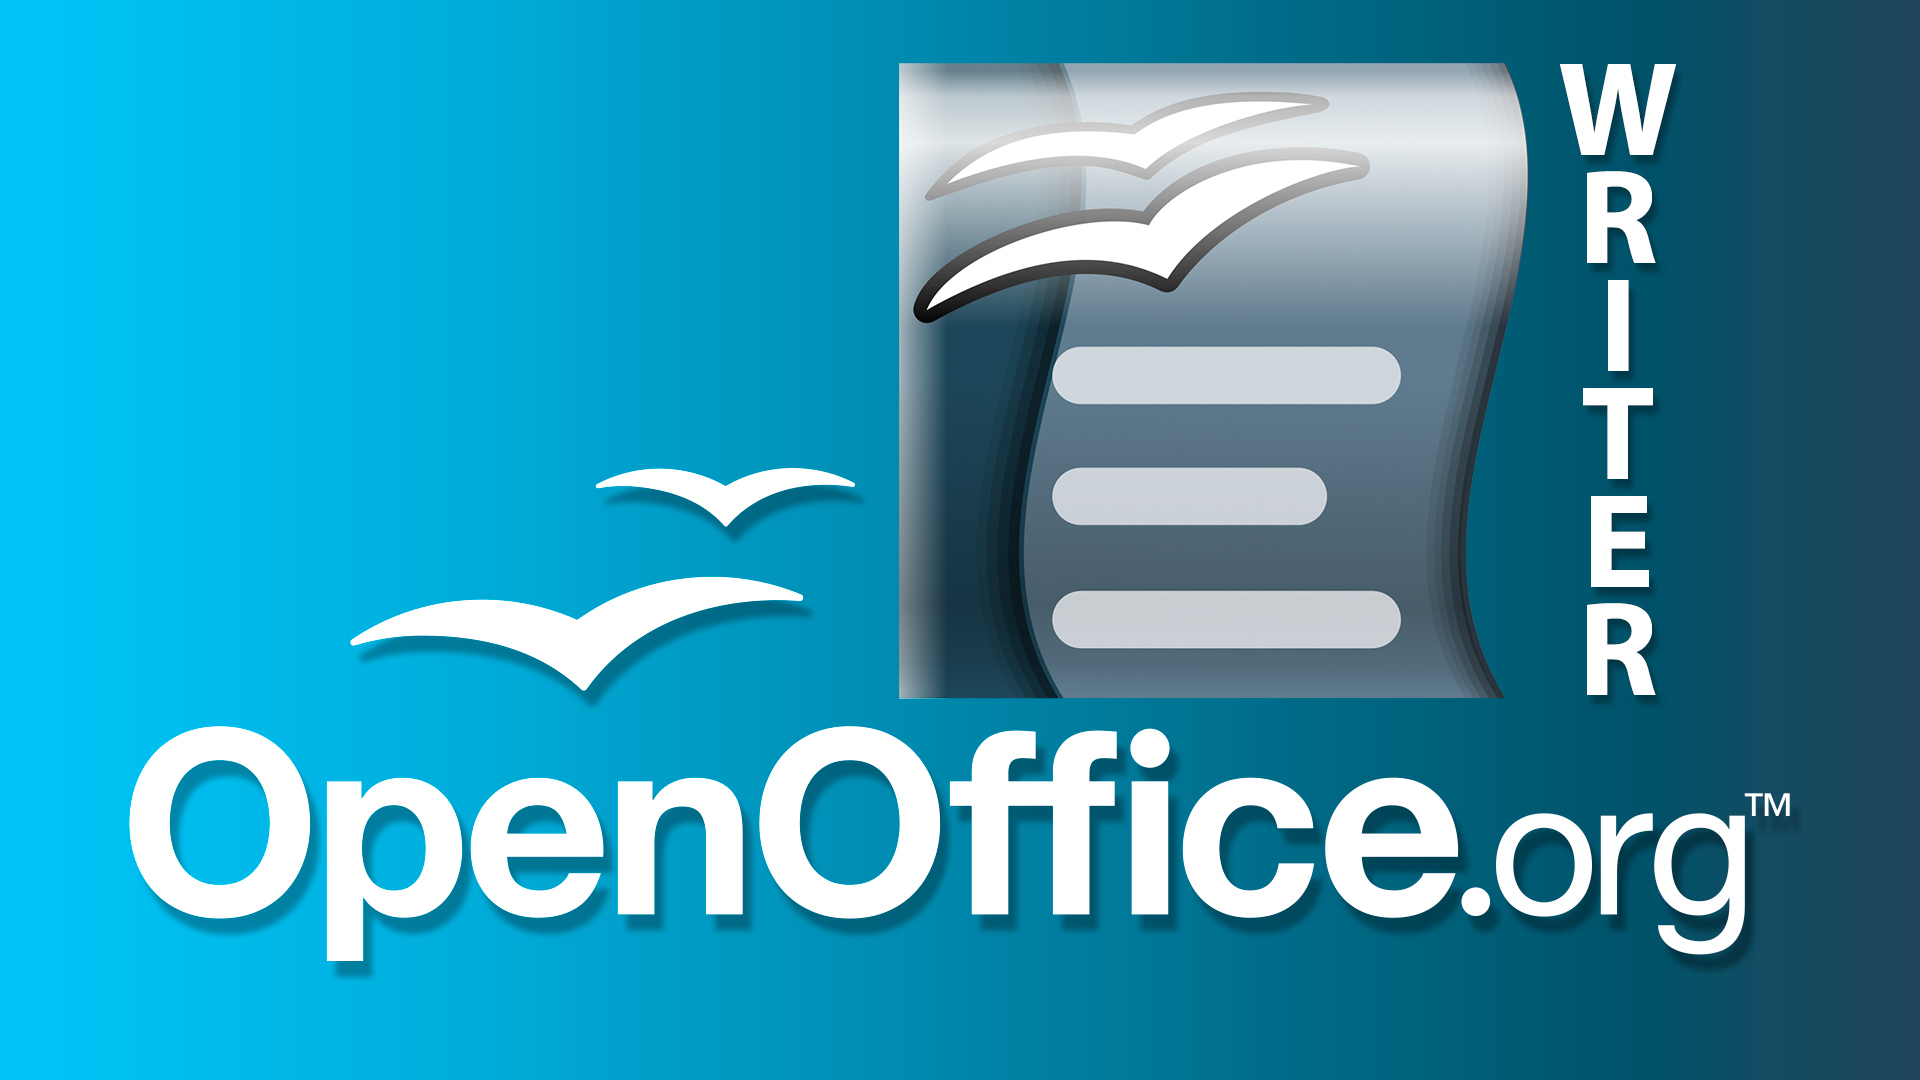 open office writer to microsoft word converter